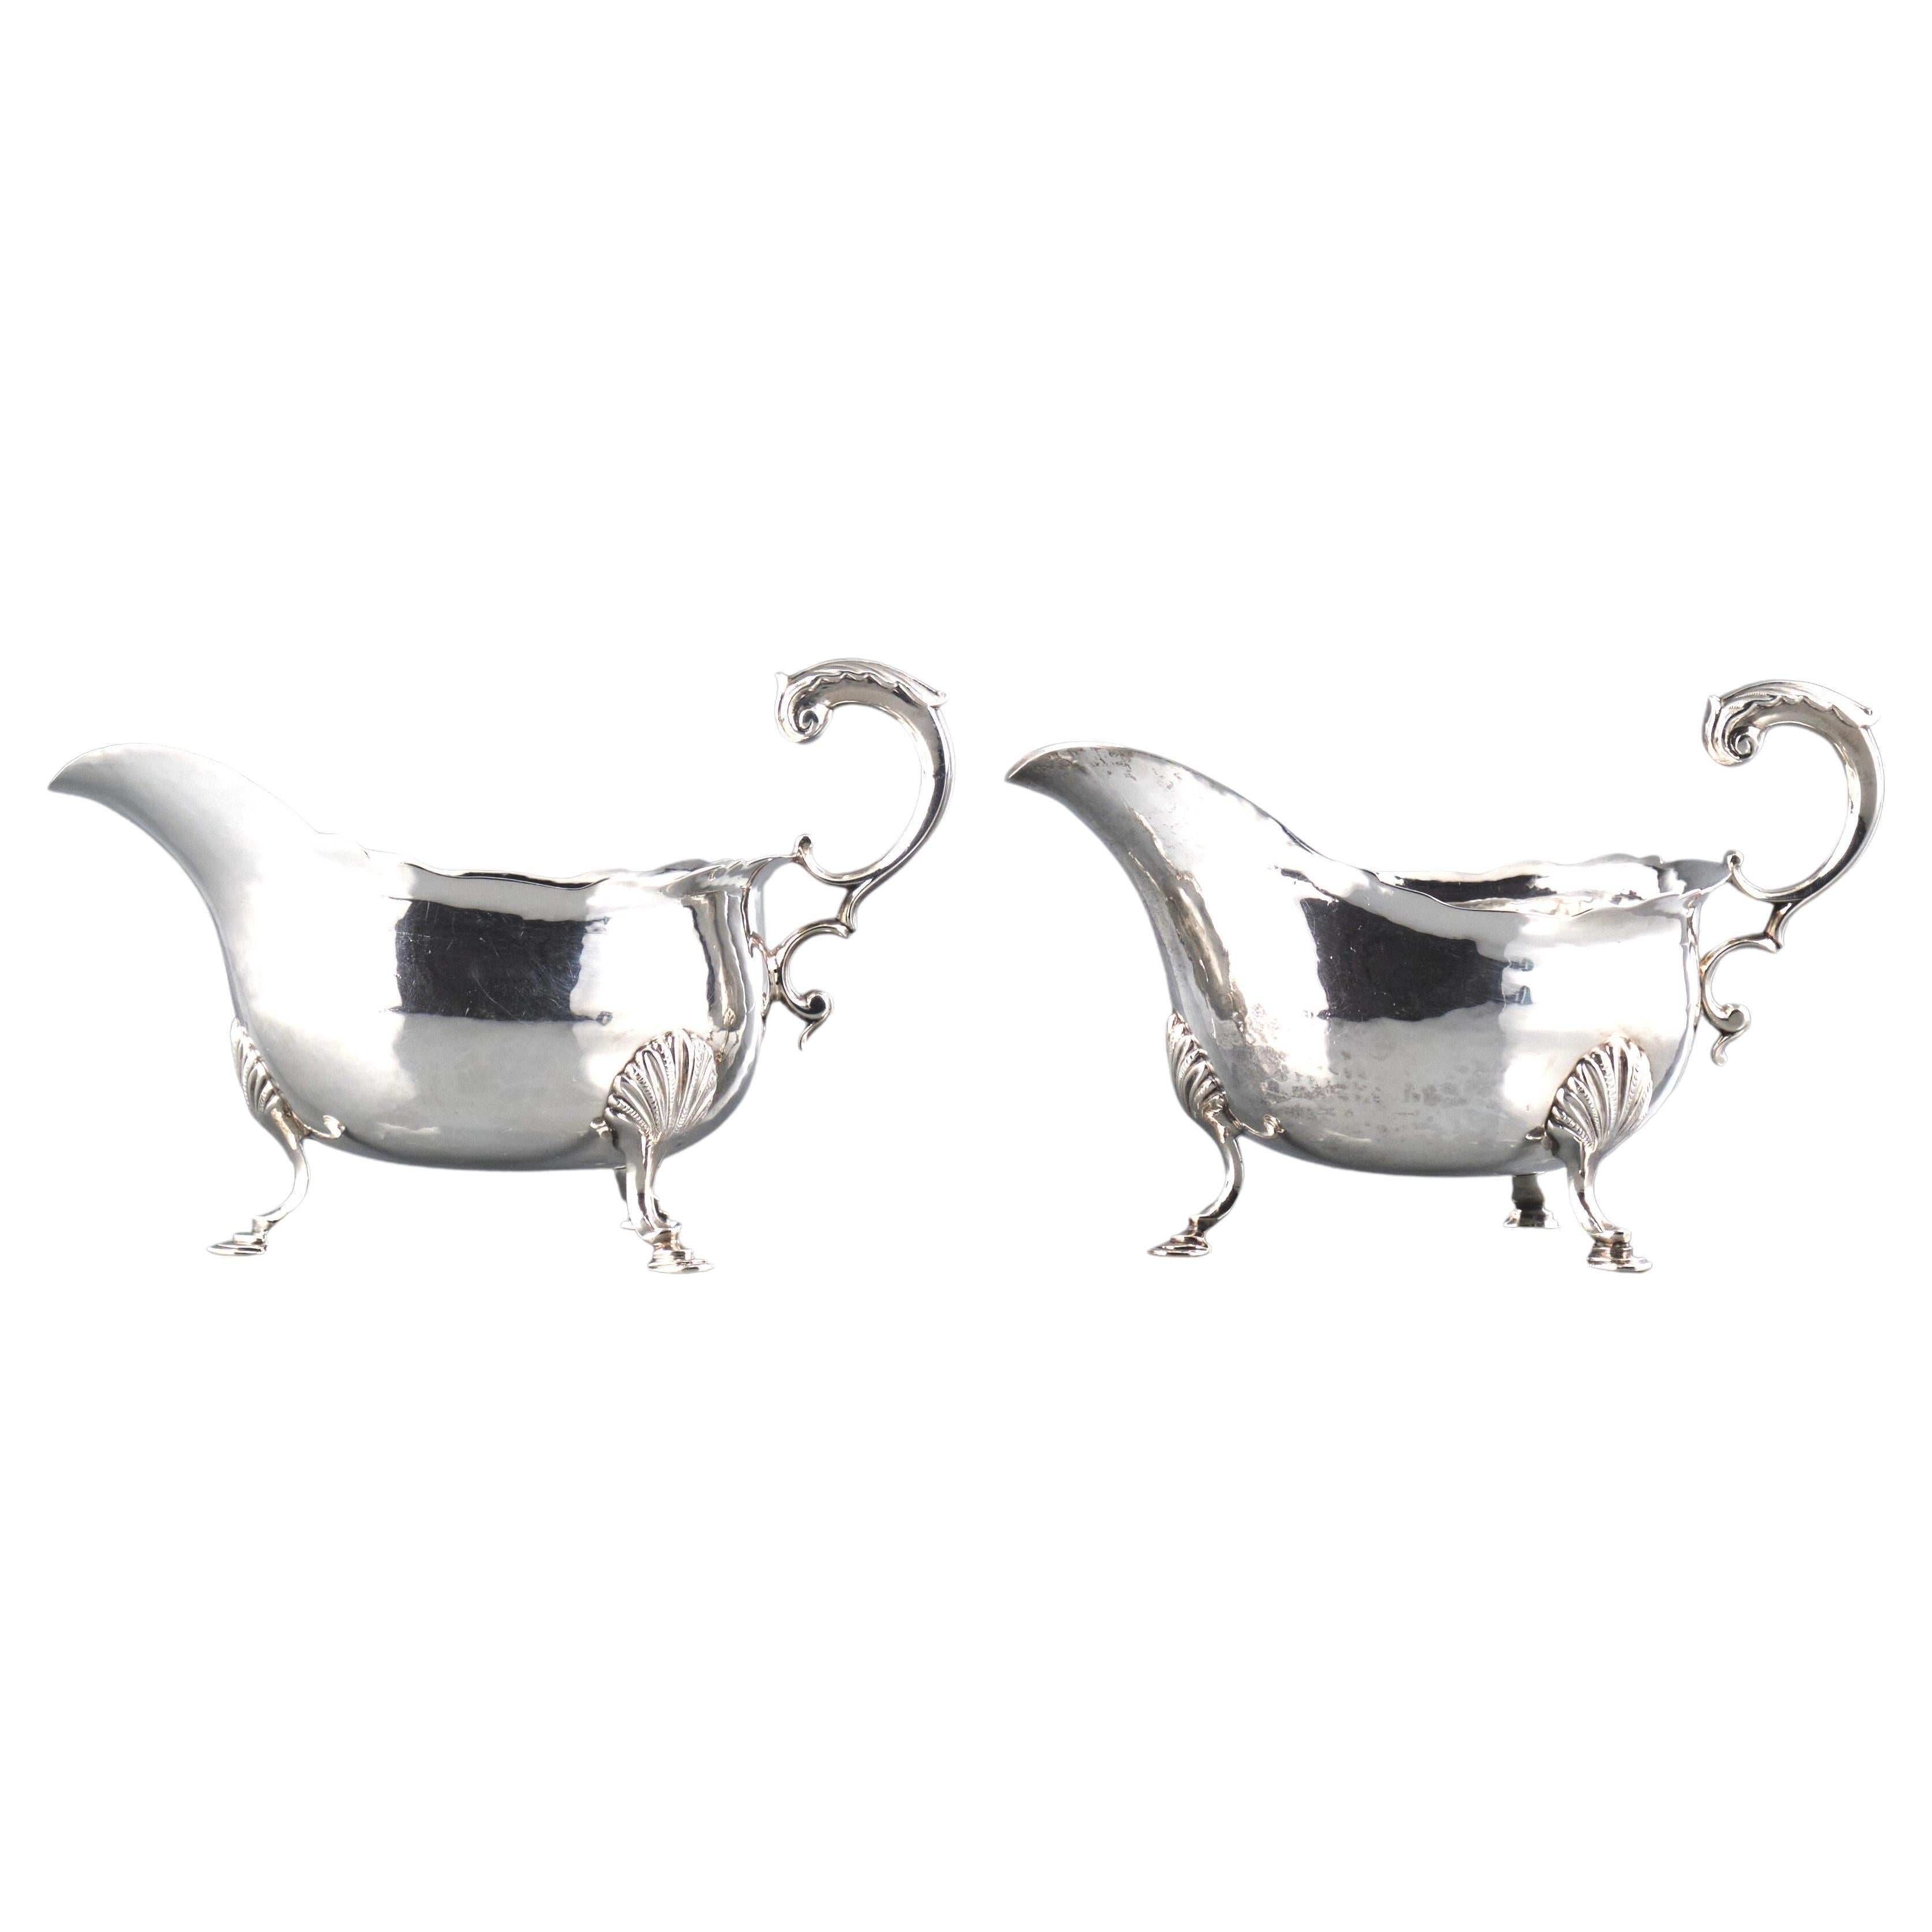 Fine Pair of Mid 18th Century Georgian Sterling Silver Sauce Boats, London 1762 For Sale